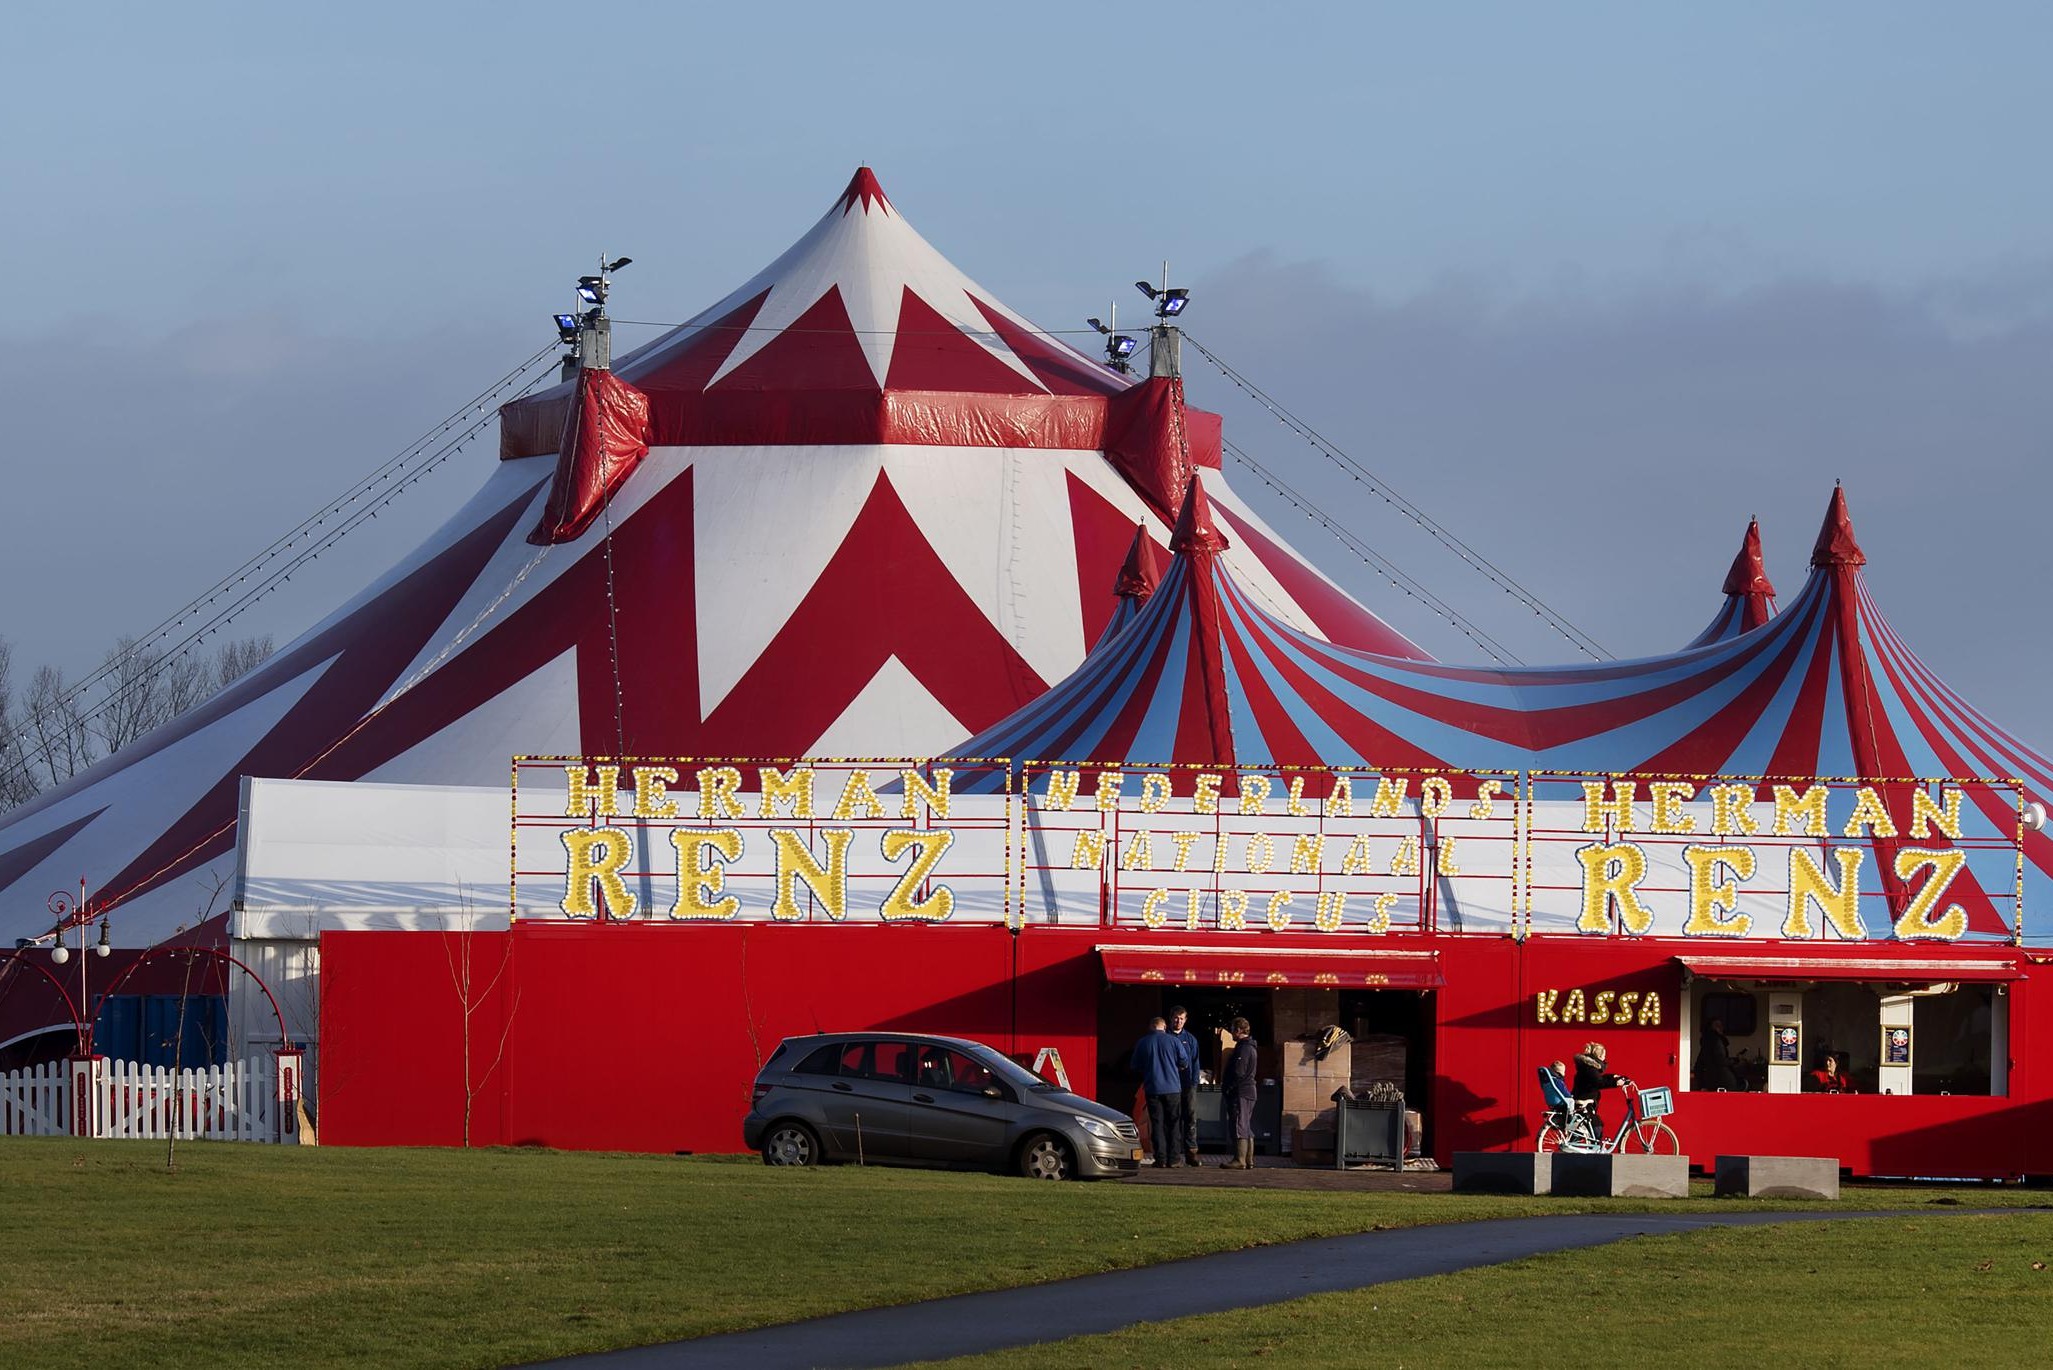 Circus world in turmoil after arrest at well.known Renz family: “A world full of hatred and envy”